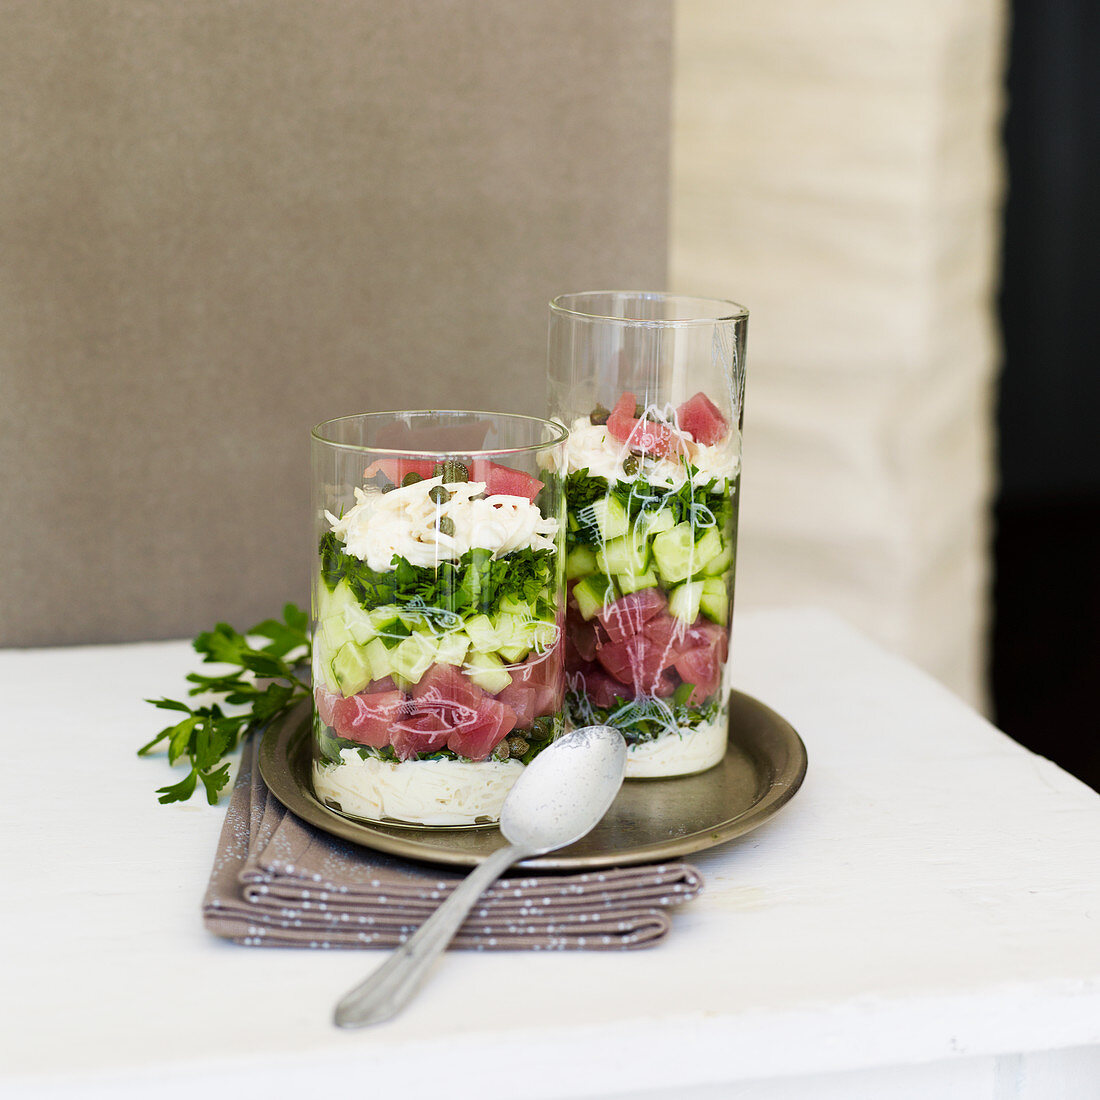 Layered dish with celery remoulade, red tuna and wasabi